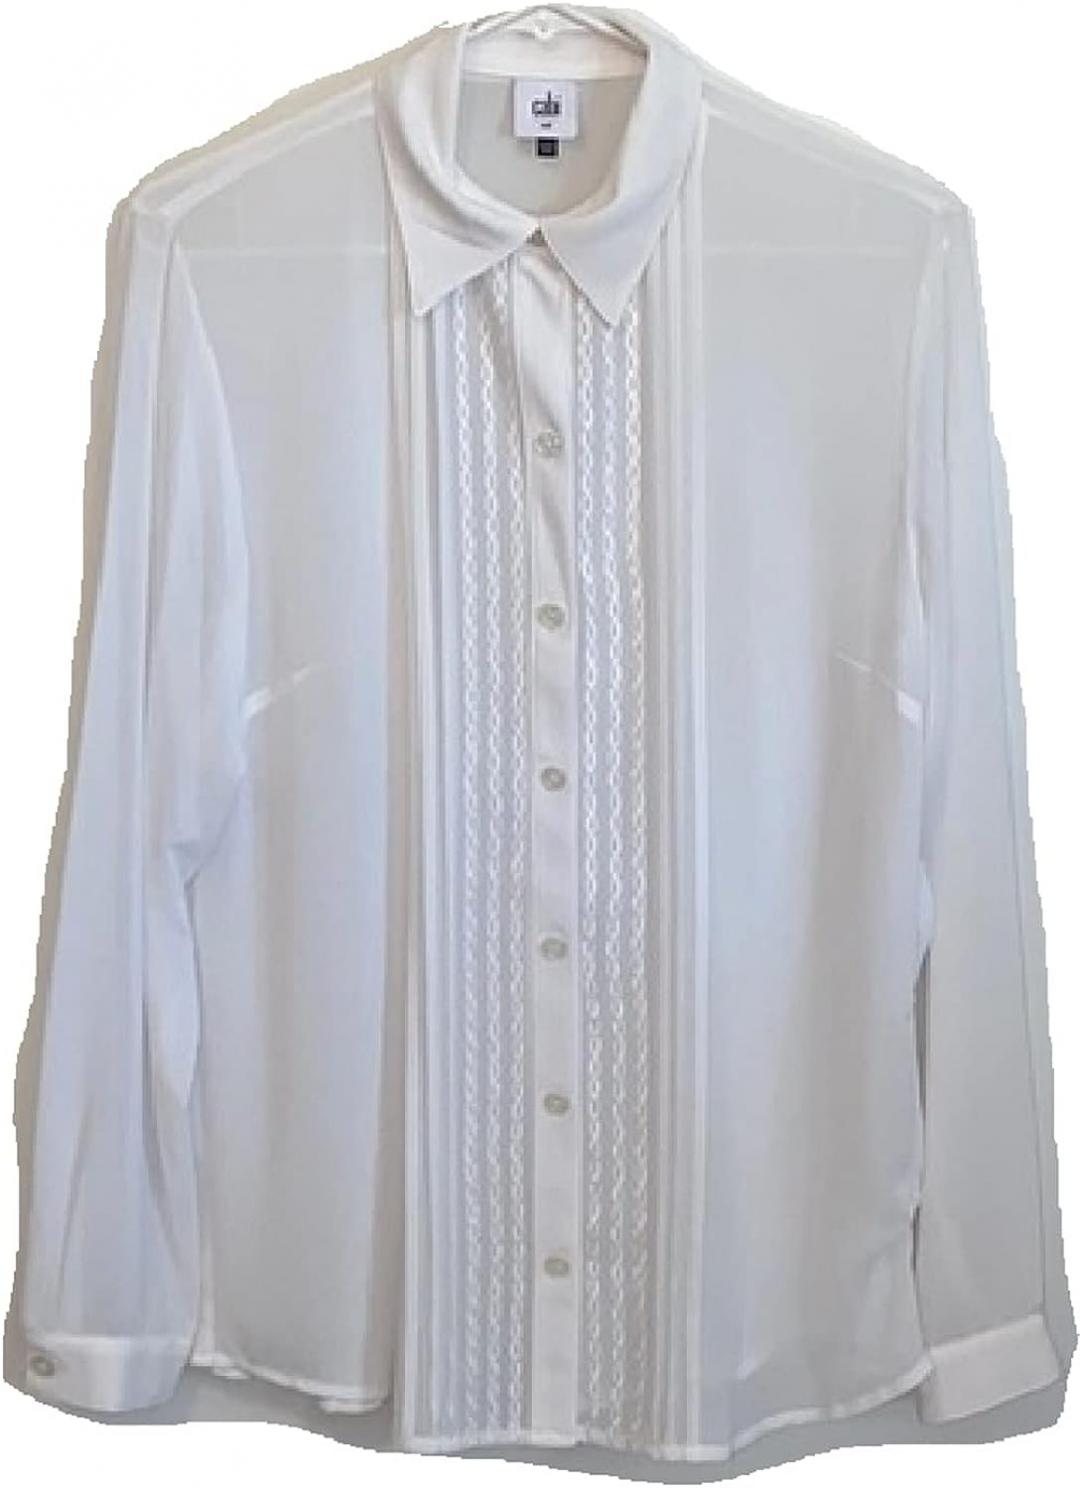 cabi White ling Sleeve Playwright Blouse